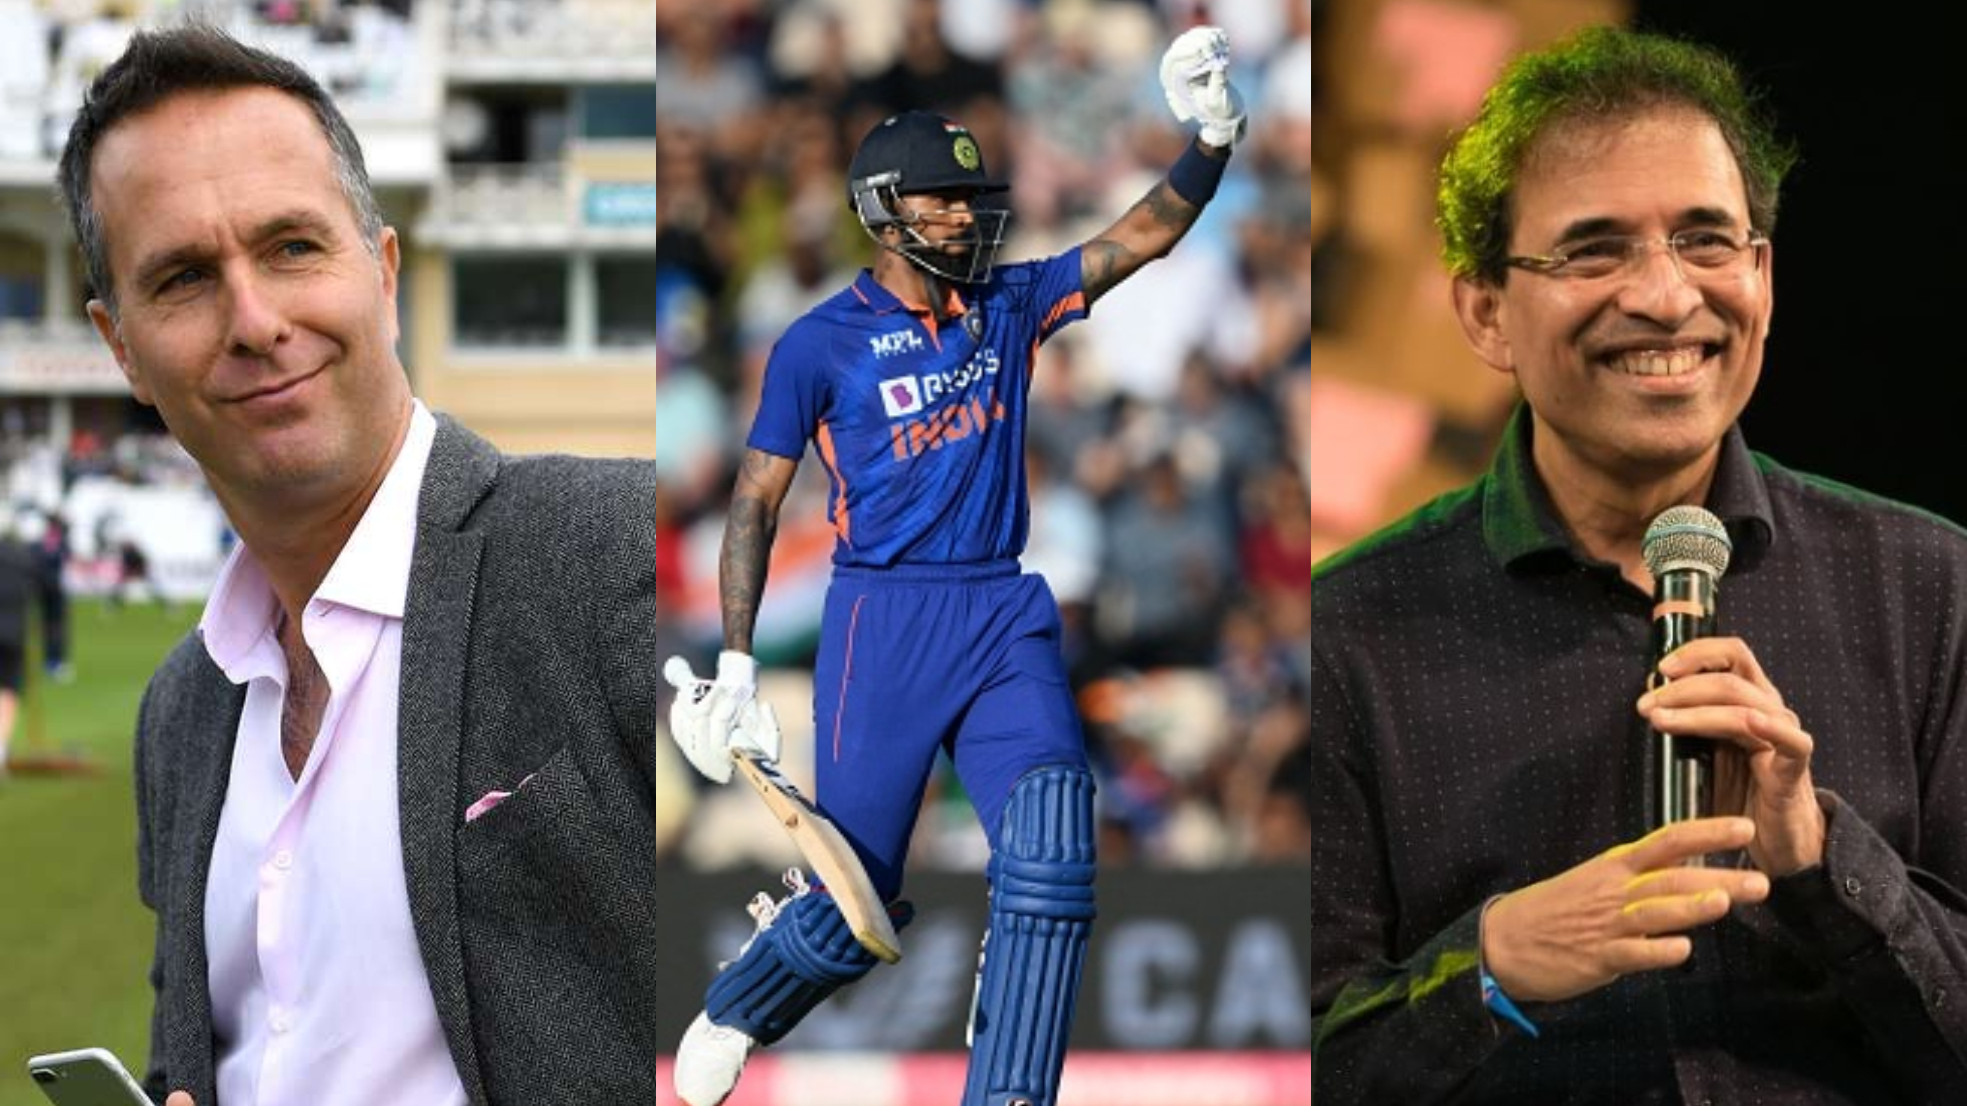 ENG v IND 2022: Harsha Bhogle and Michael Vaughan react to India’s ultra-aggressive approach as they score 198/8